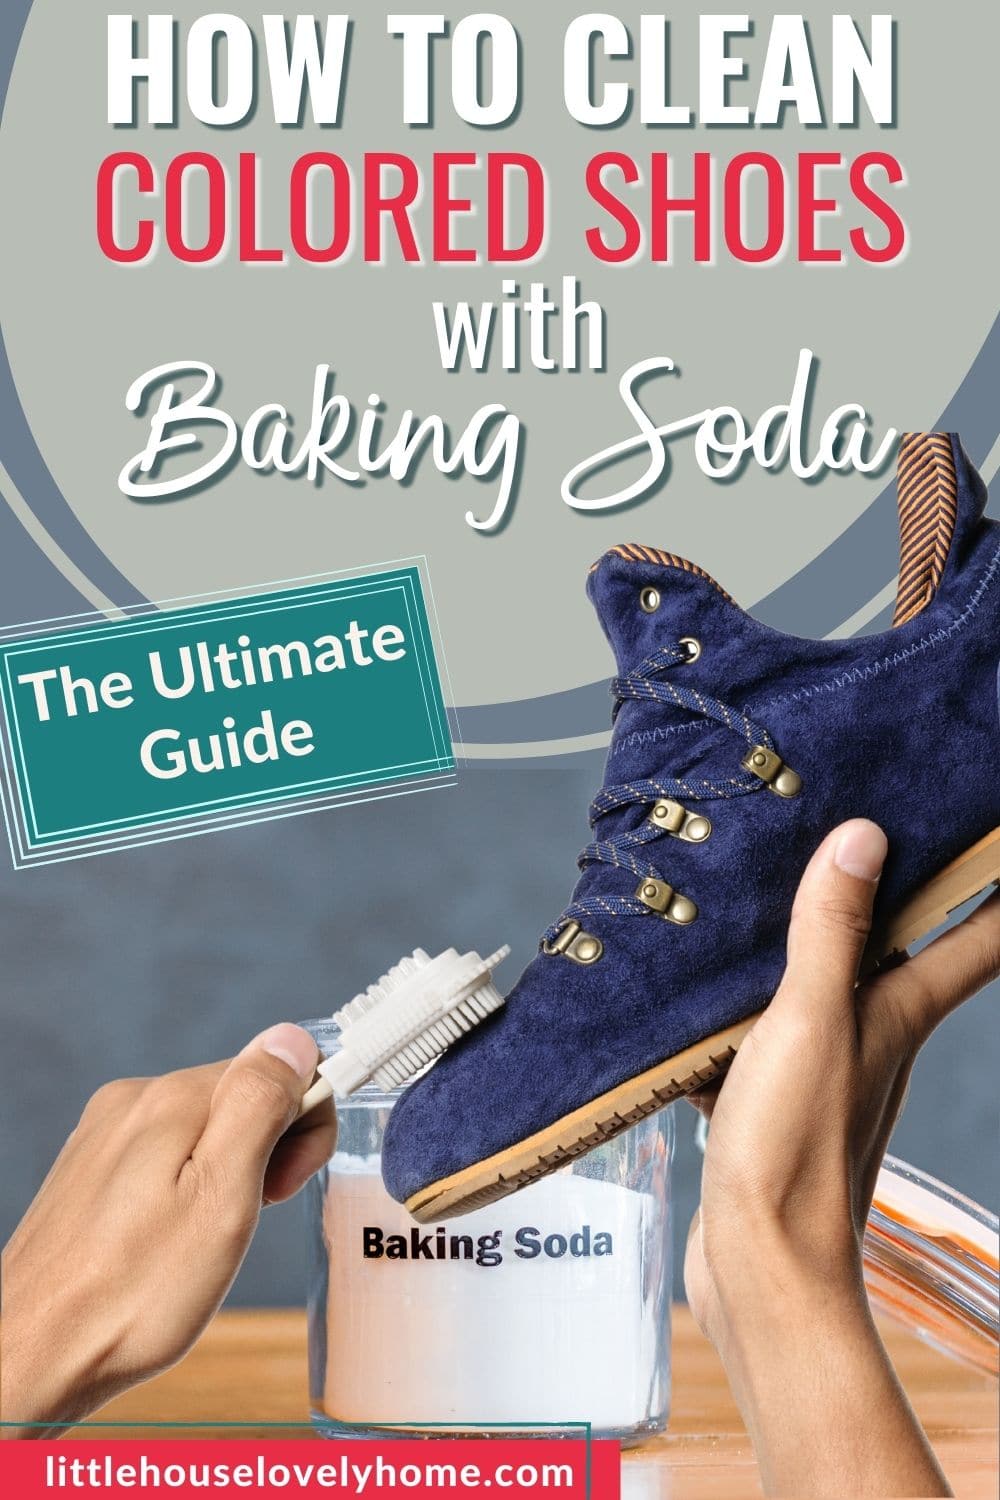 Image showing a hand holding a shoe, and anothr hand holding a brush and brushing the shoe with text overlays that read s How to Clean Colored Shoes With Baking Soda